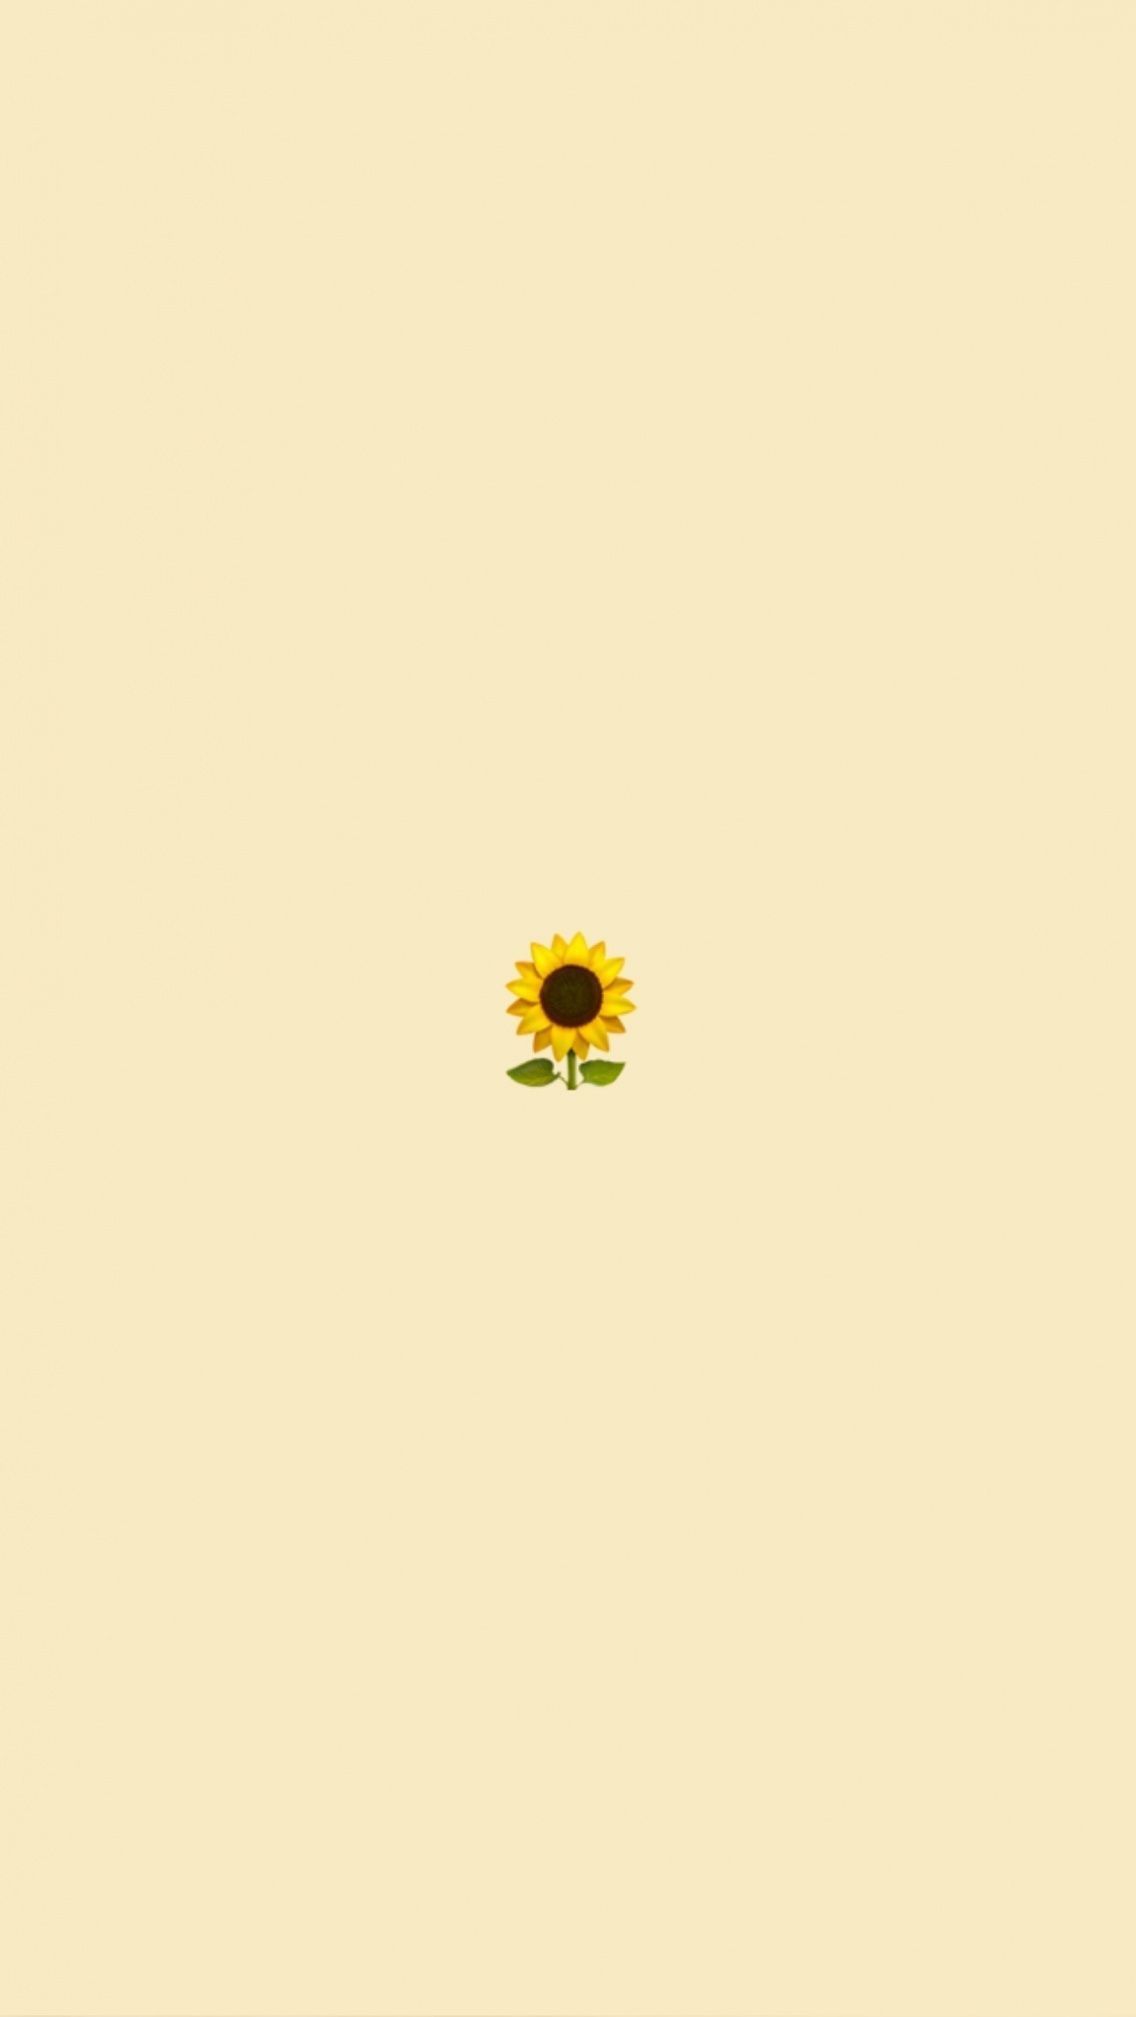 A sunflower is on the cover of this album - VSCO